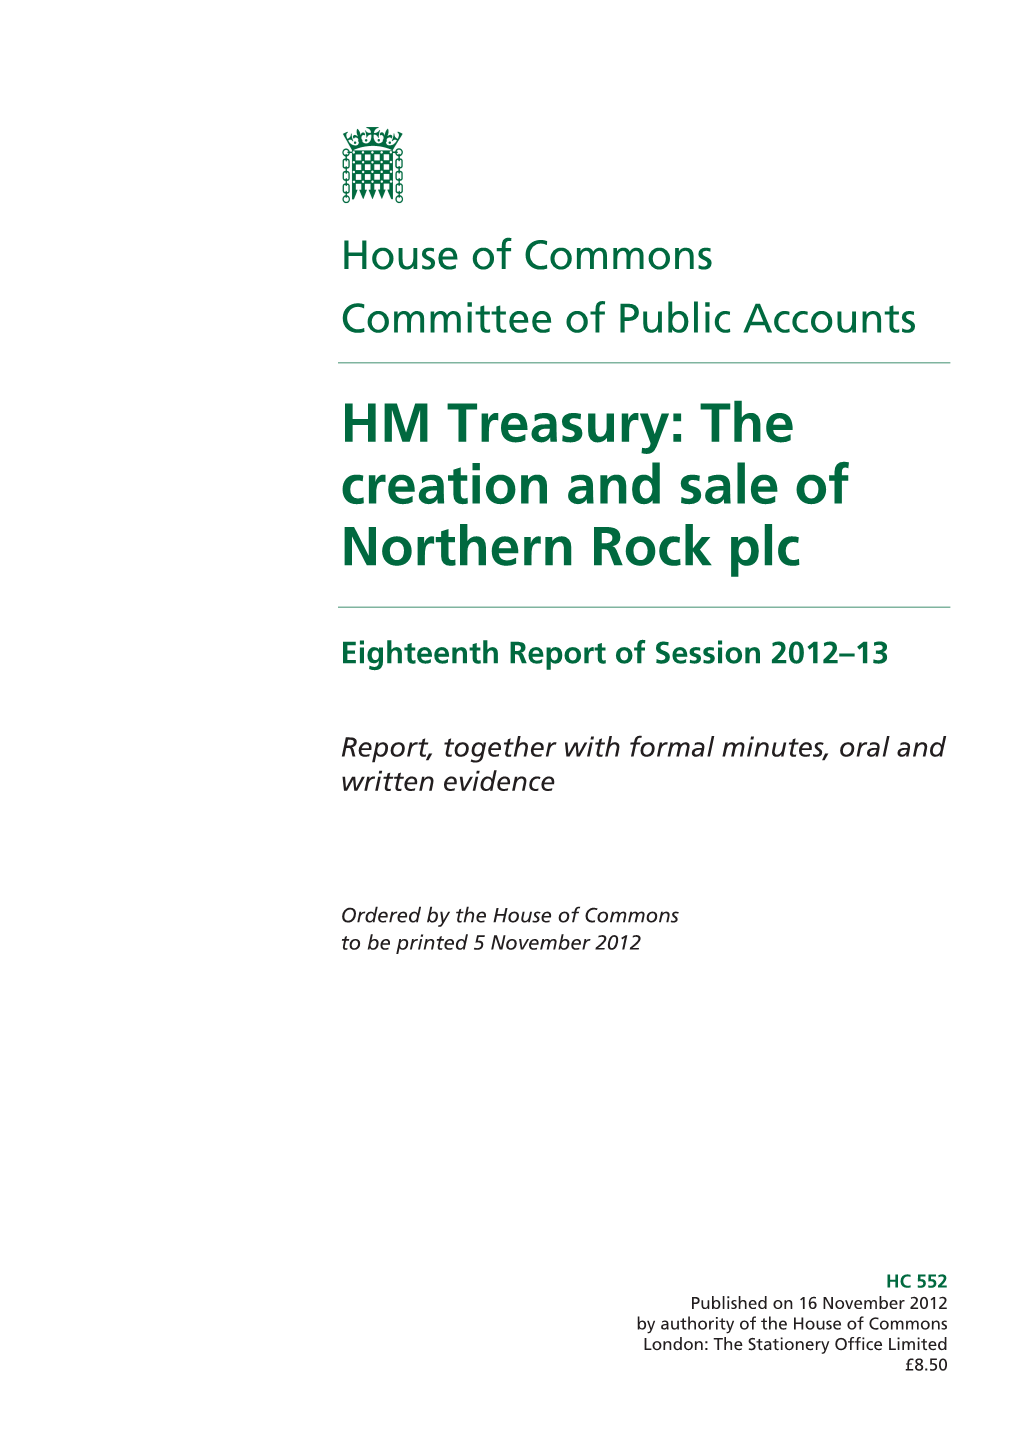 HM Treasury: the Creation and Sale of Northern Rock Plc